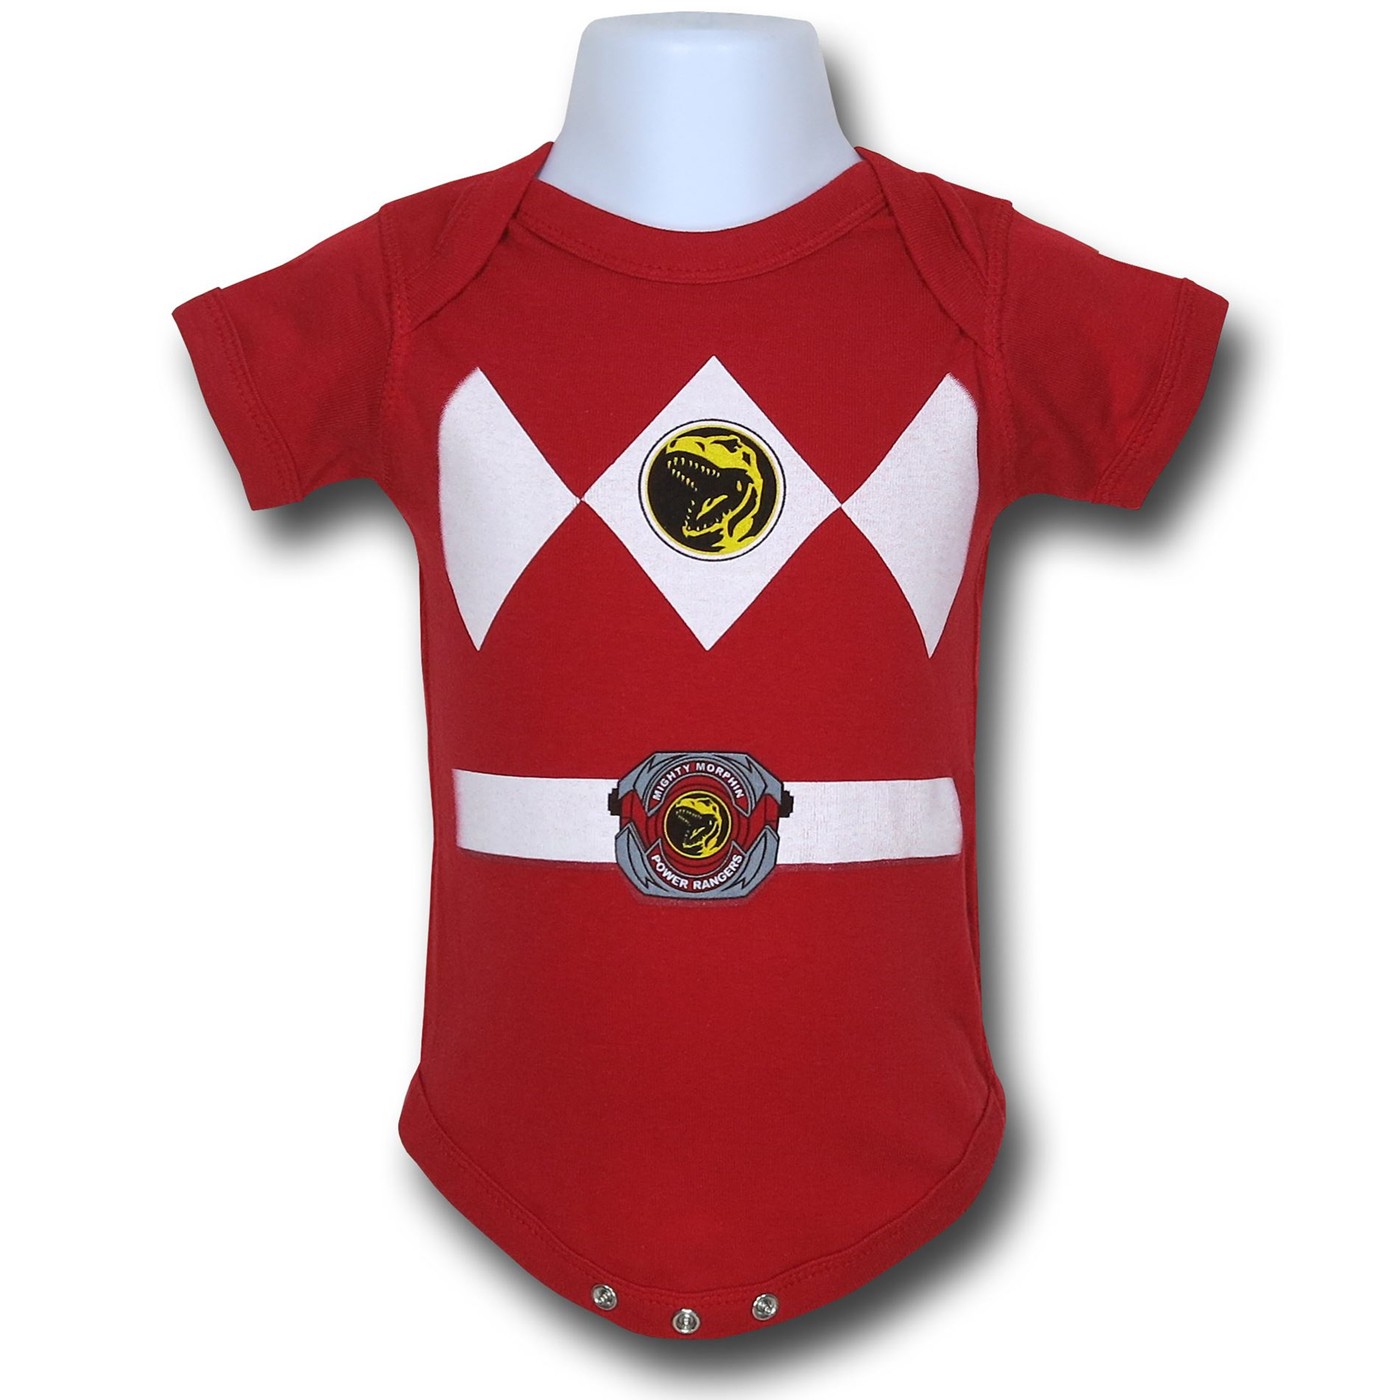 Power Rangers Red Infant Snapsuit